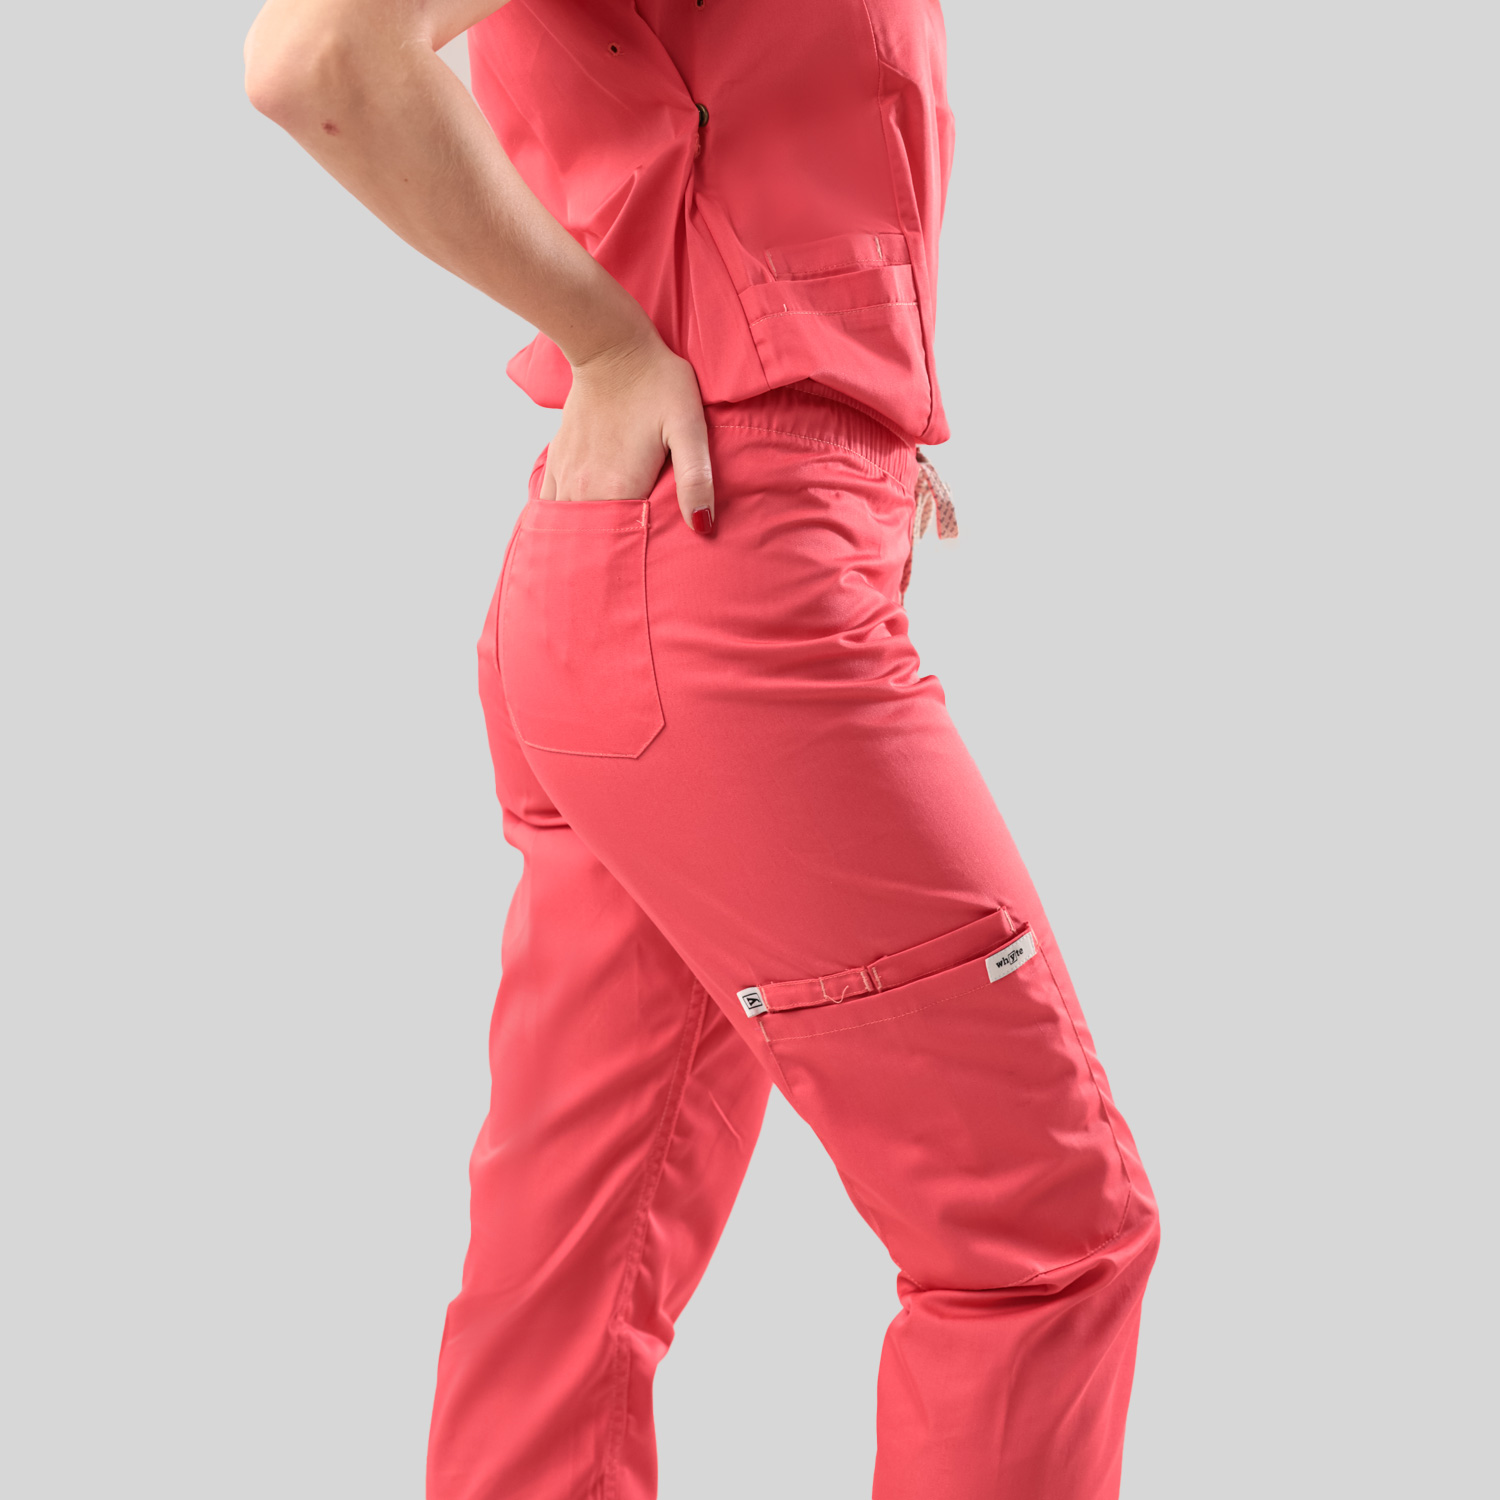 classic edition-2.0 - corail- pant- 3 pockets